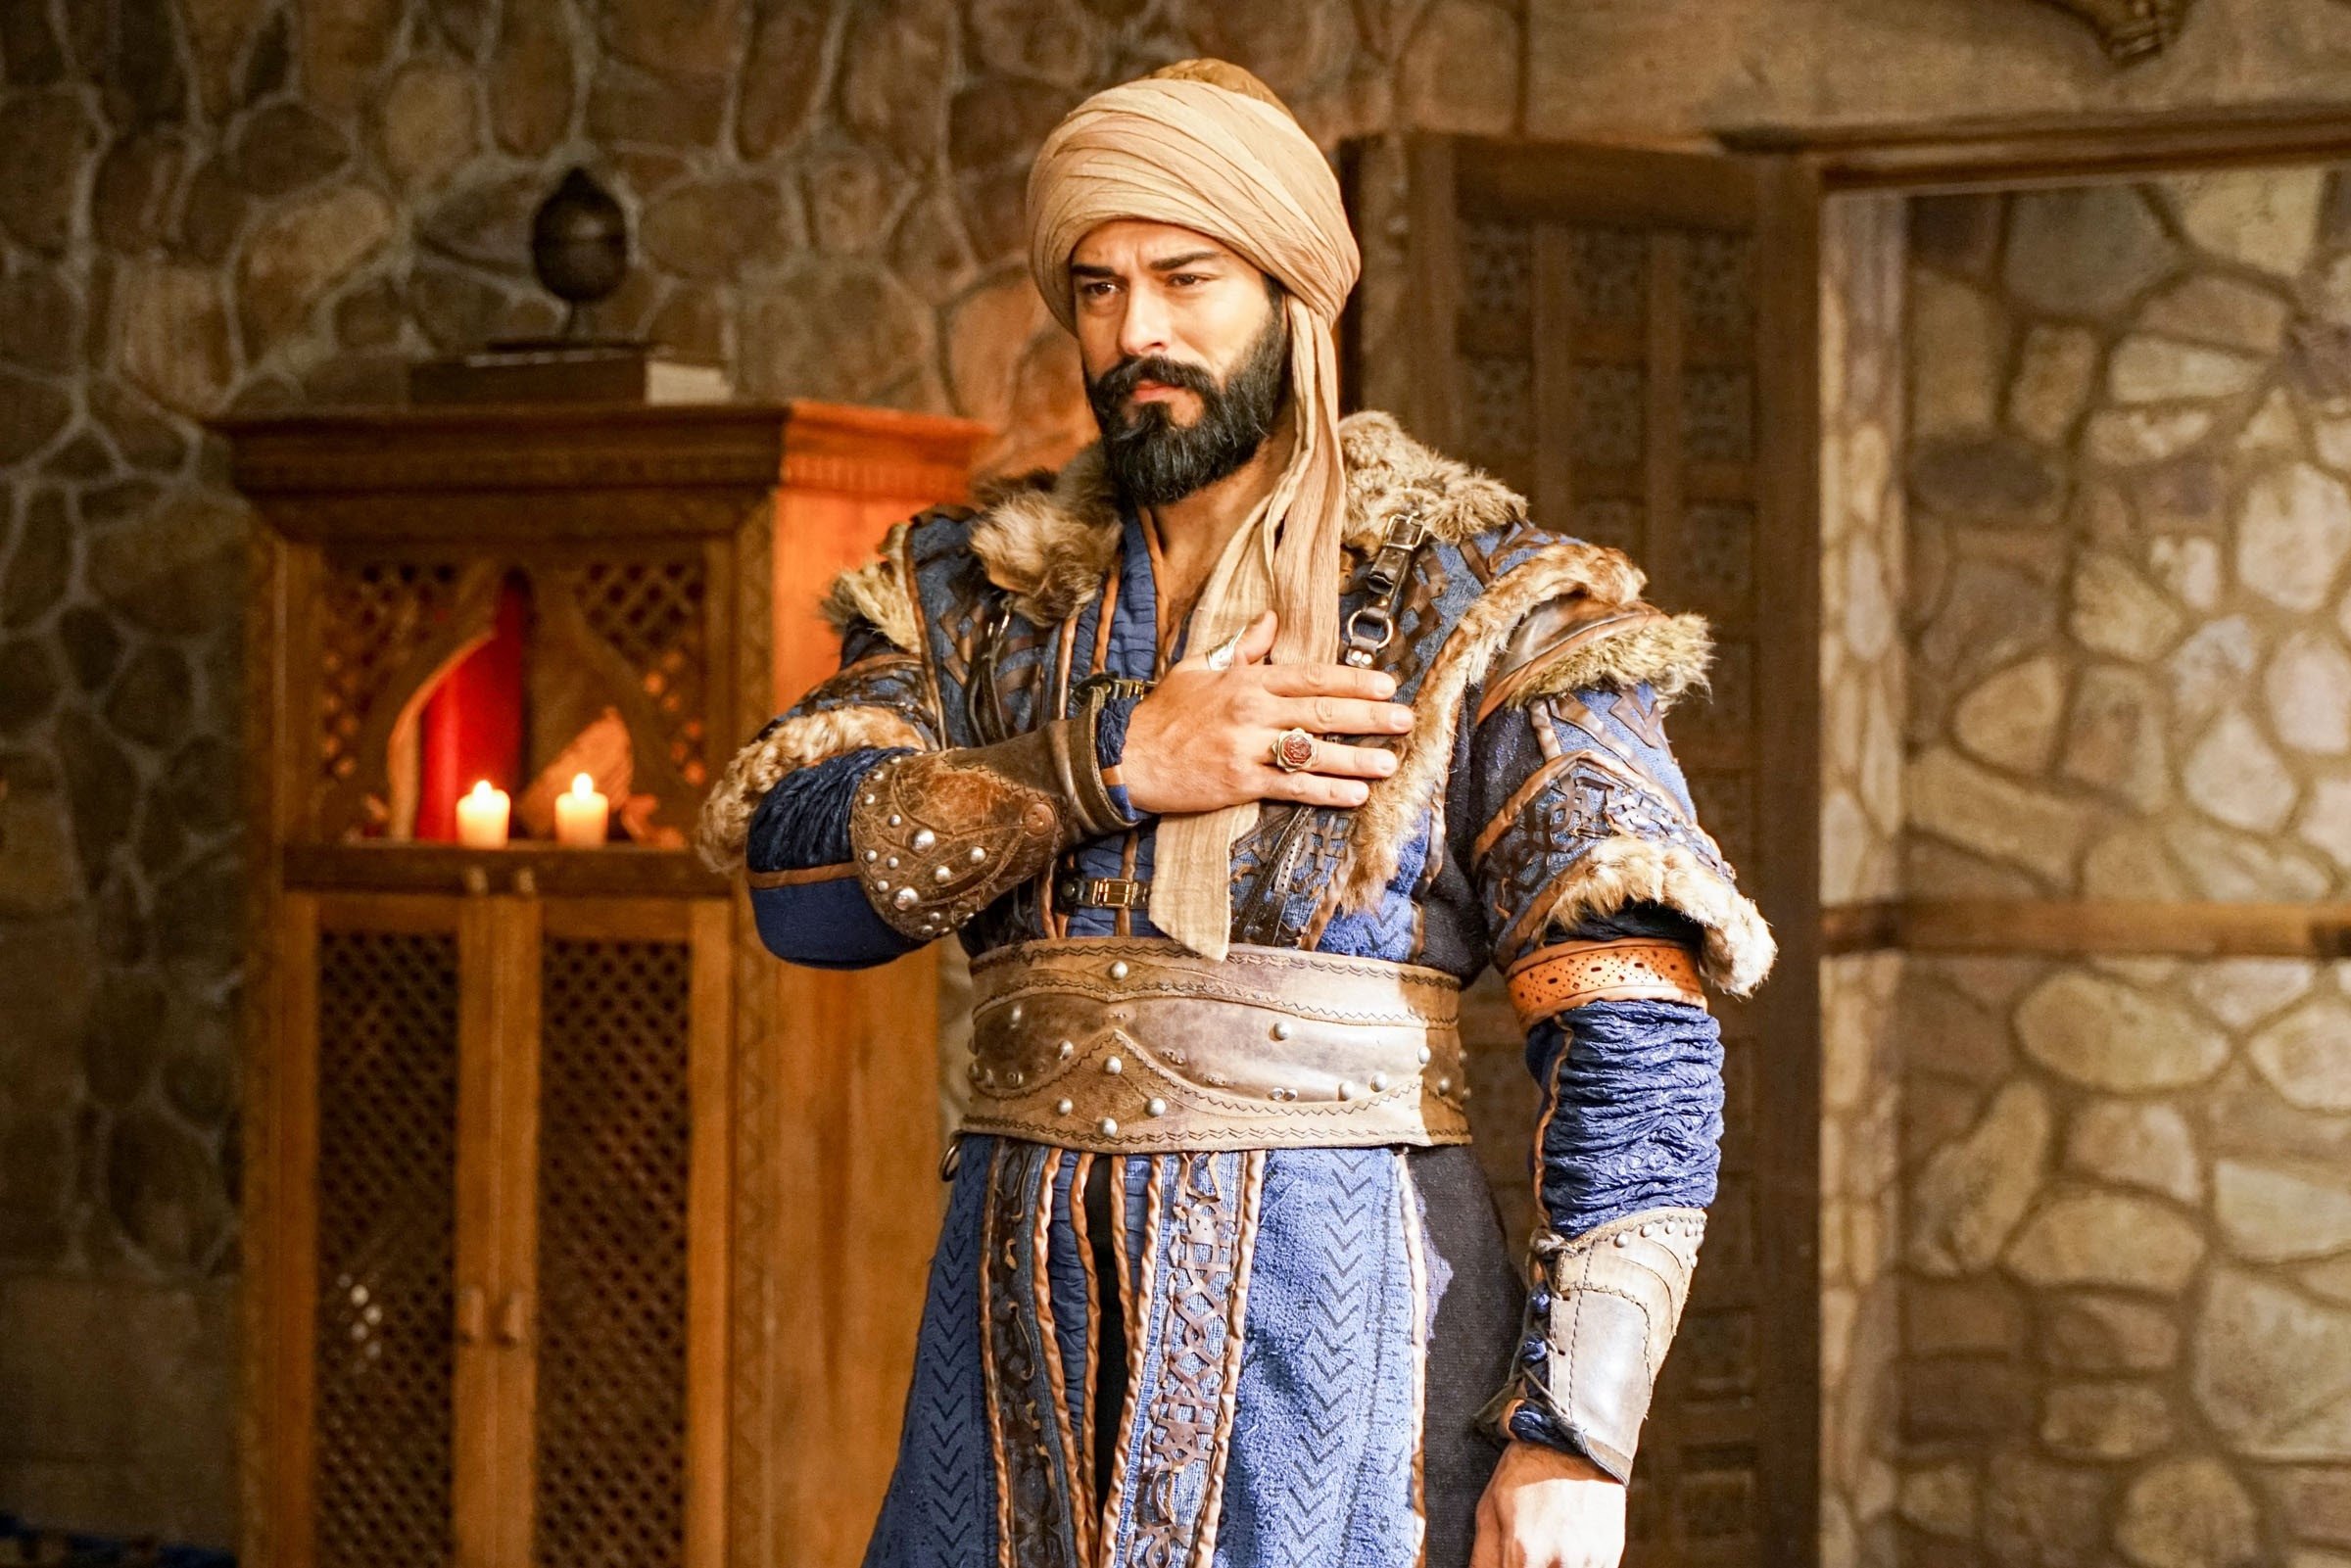 Turkish serial 'The Ottoman' to air in Pakistan soon